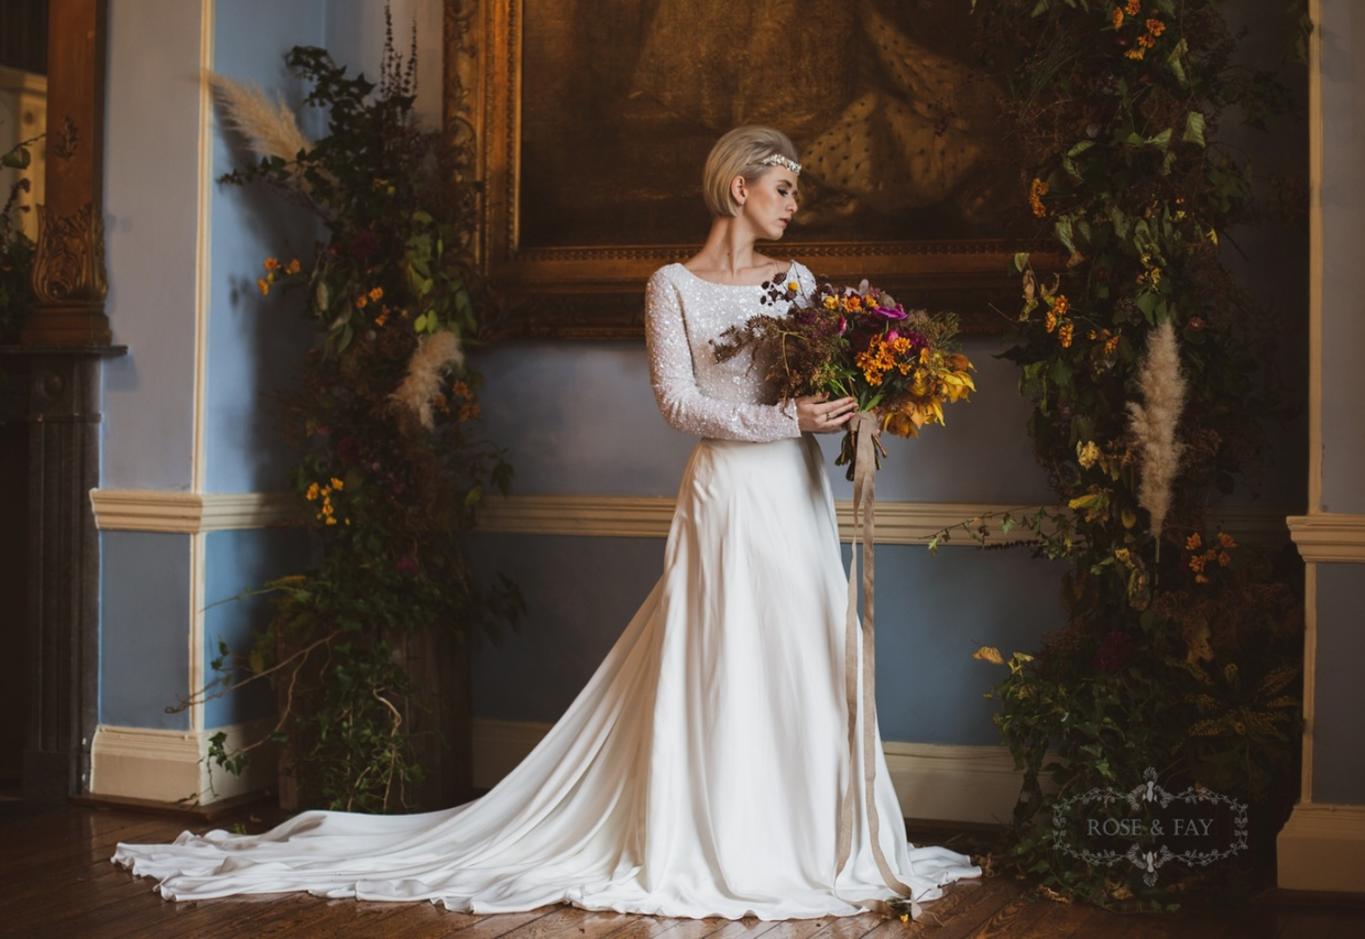 Styled Shot Avante Garde wedding venue Devizes Town Hall Whitewed Willoughby & Wolf Hibiscus & Hodge Pastel Designs classical whimsical autumnal rich grandeur